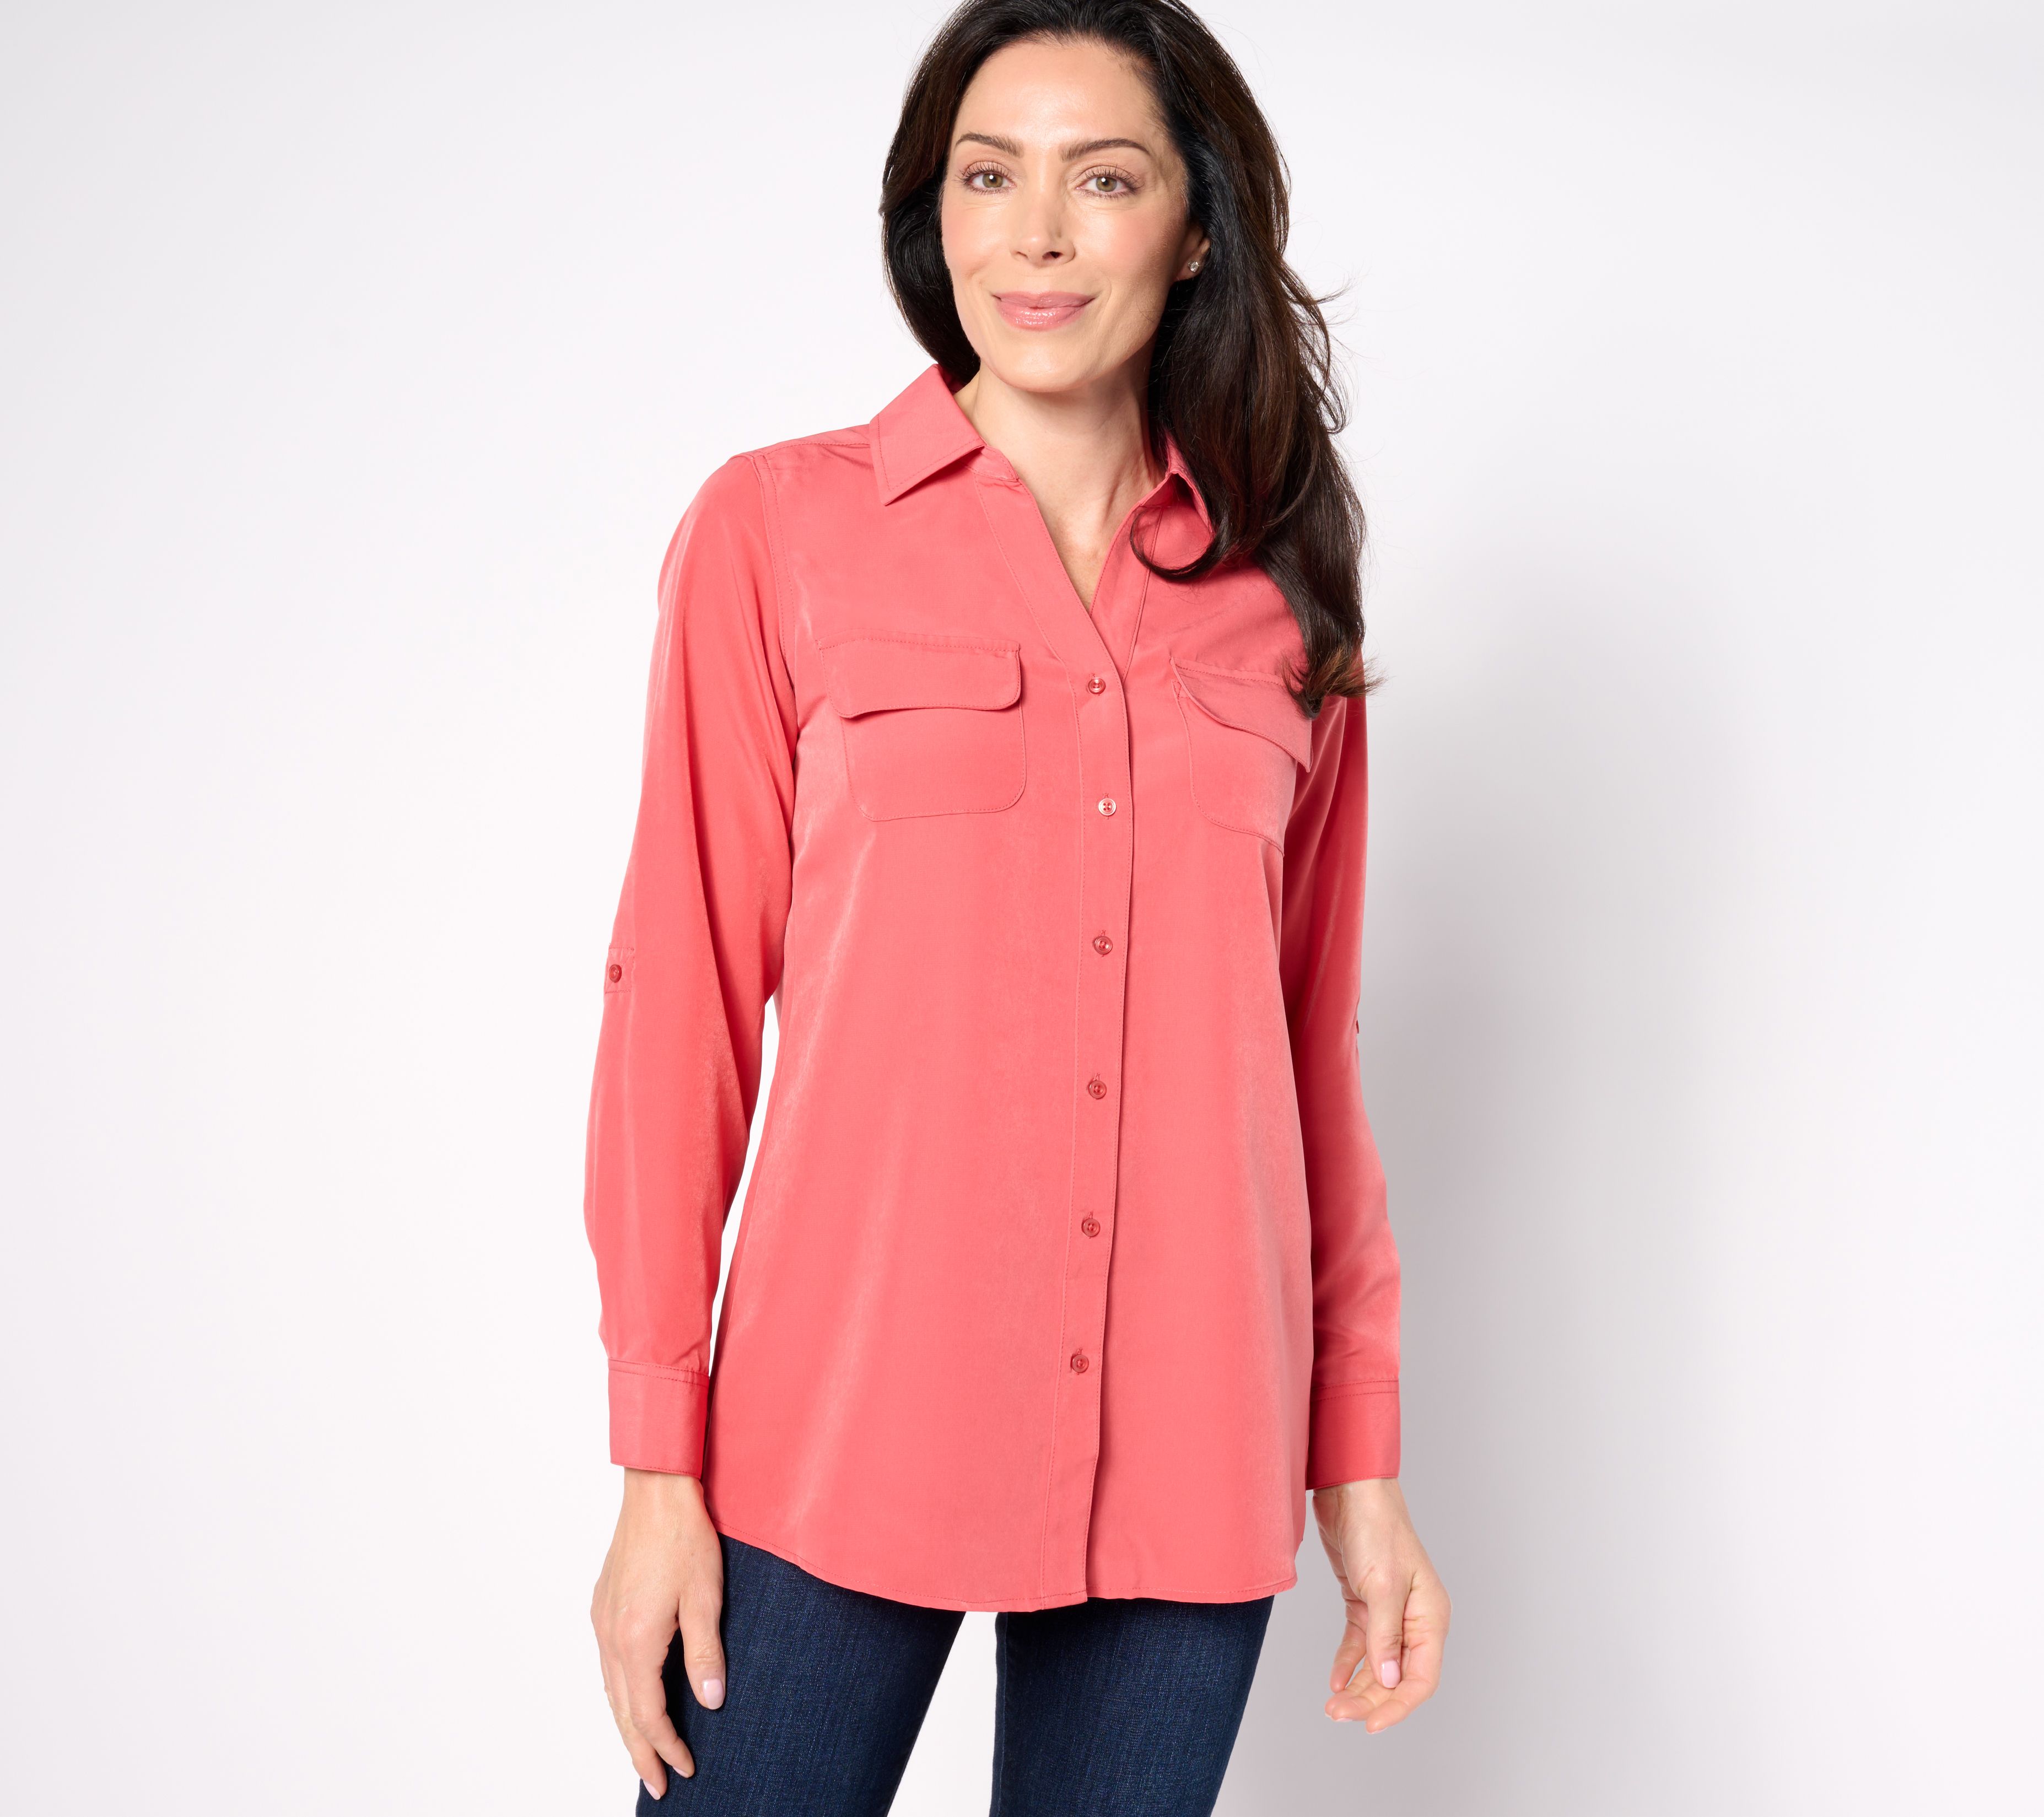 Cos Women's Button Down Top Shirt Size 8 LongSleeve Pink Collection of  Style New